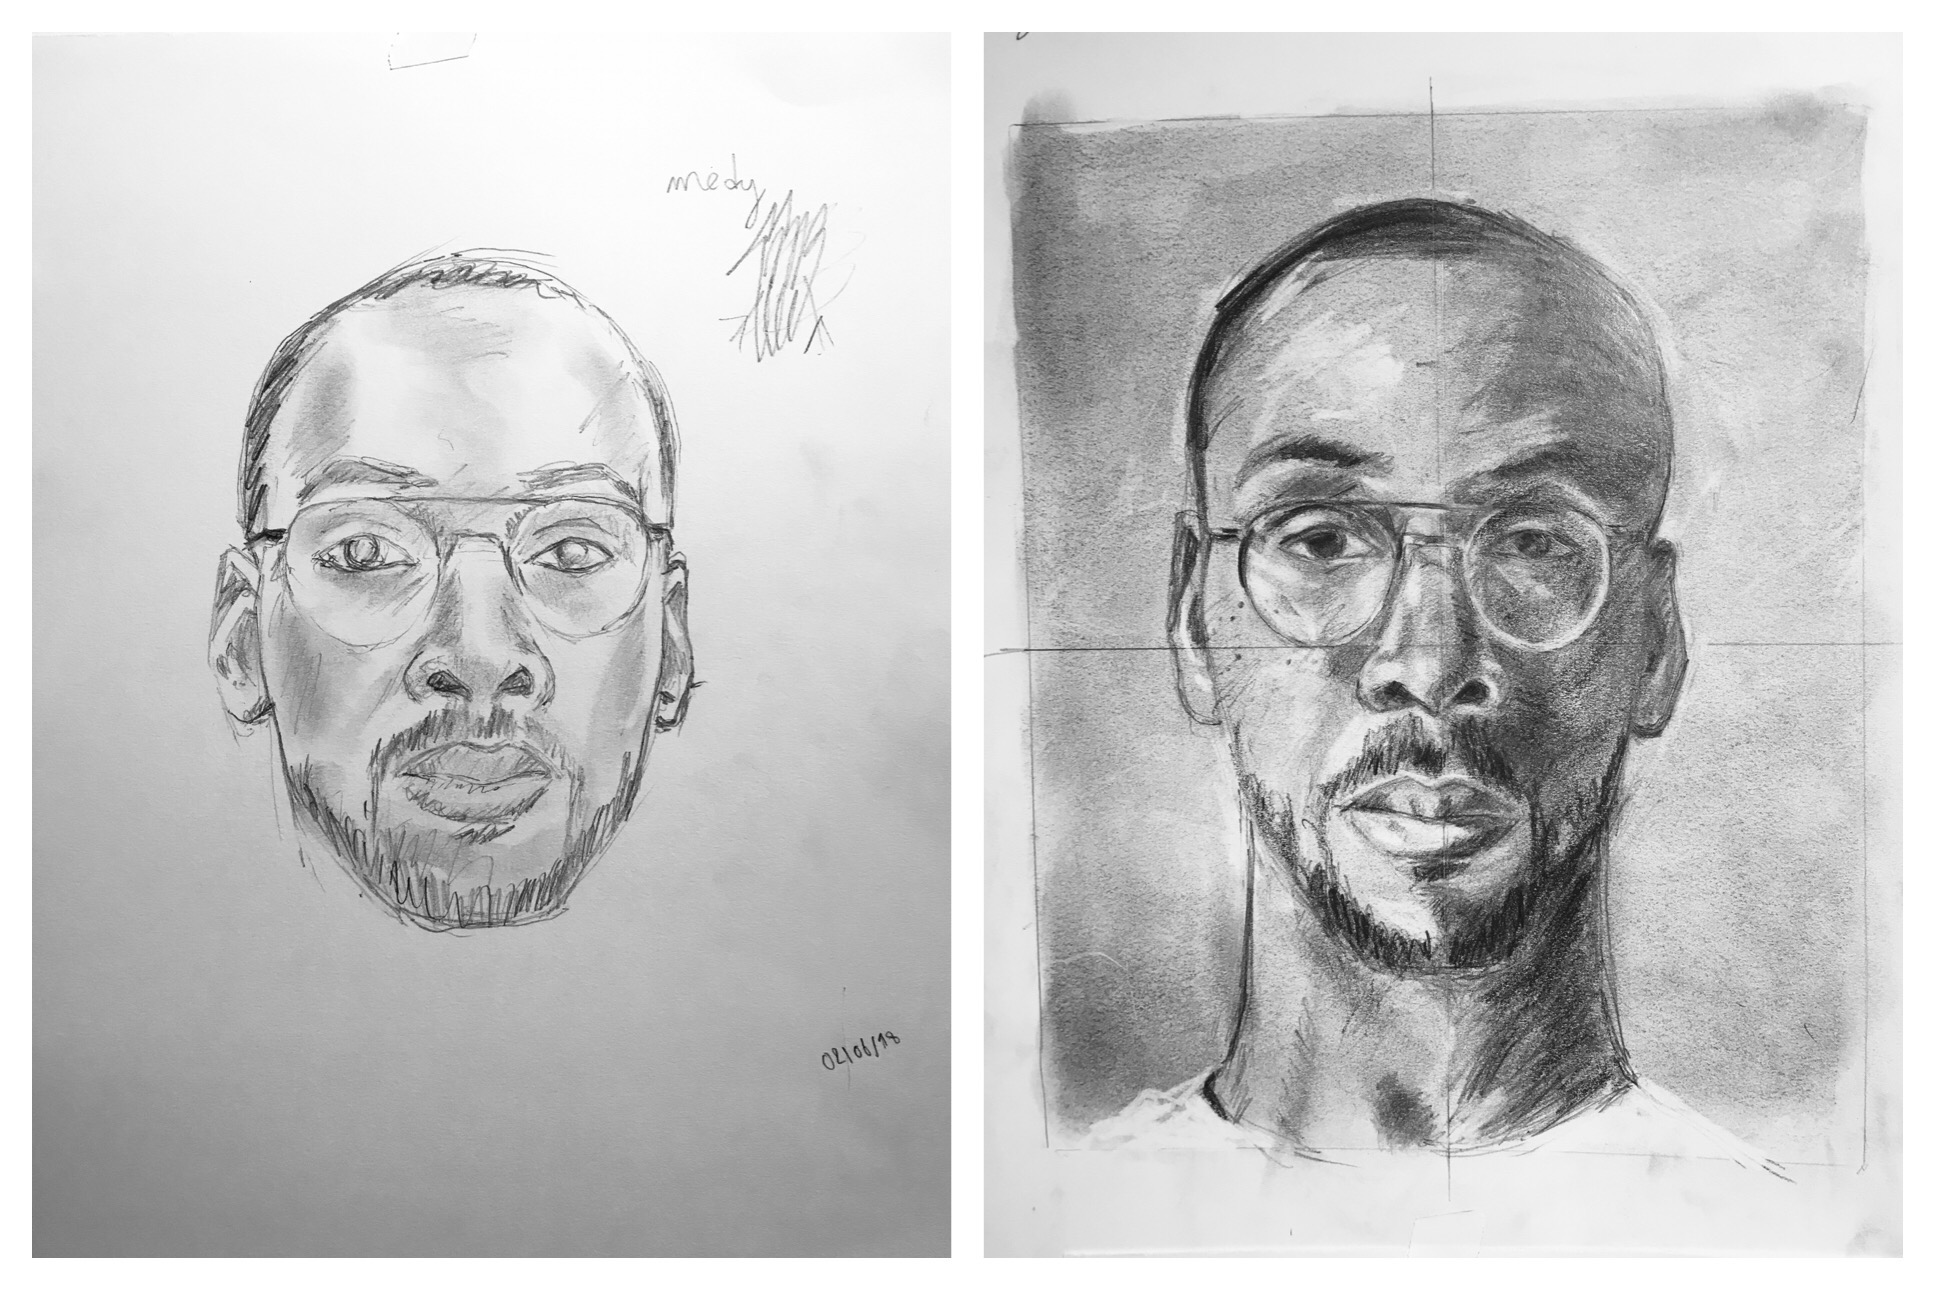 Medy's Before and After Self-Portraits August 2018 